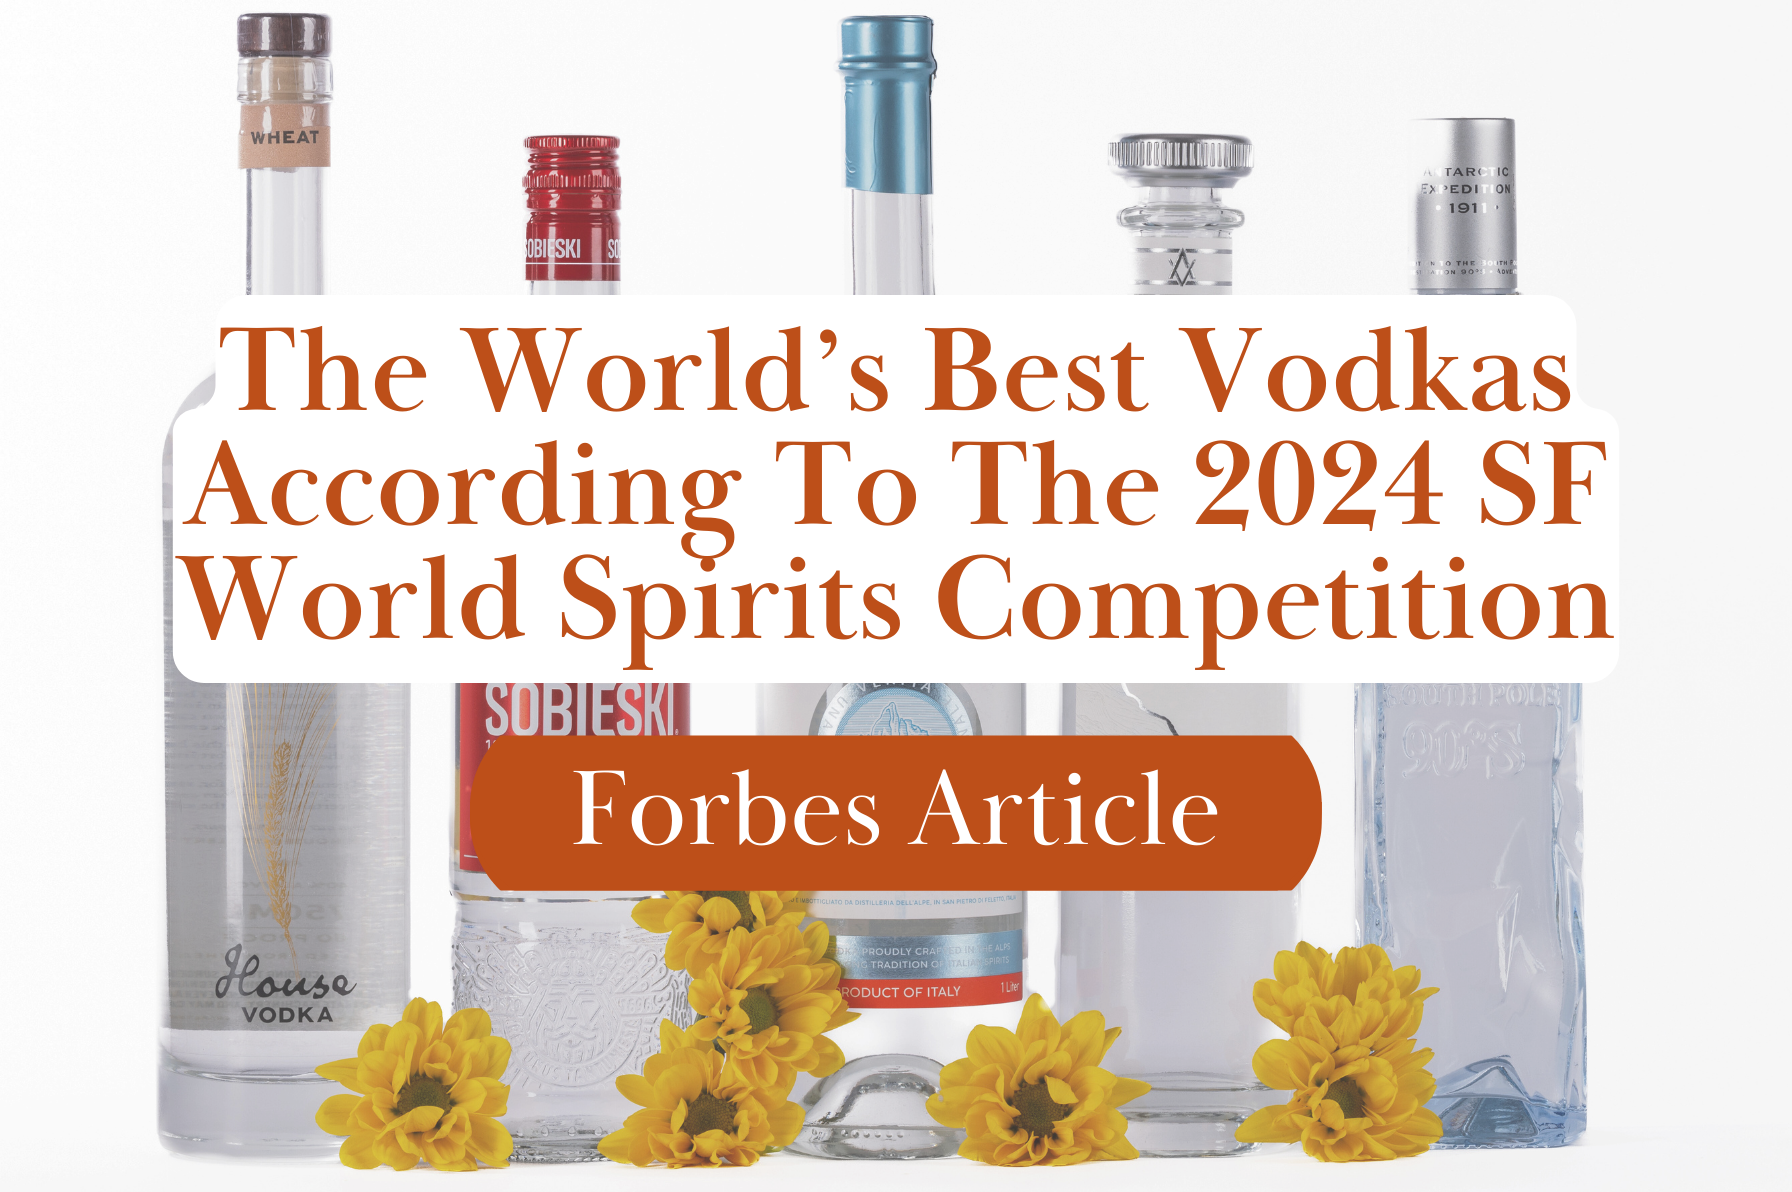 The World's Best Vodkas According to the 2024 San Francisco World Spirits Competition